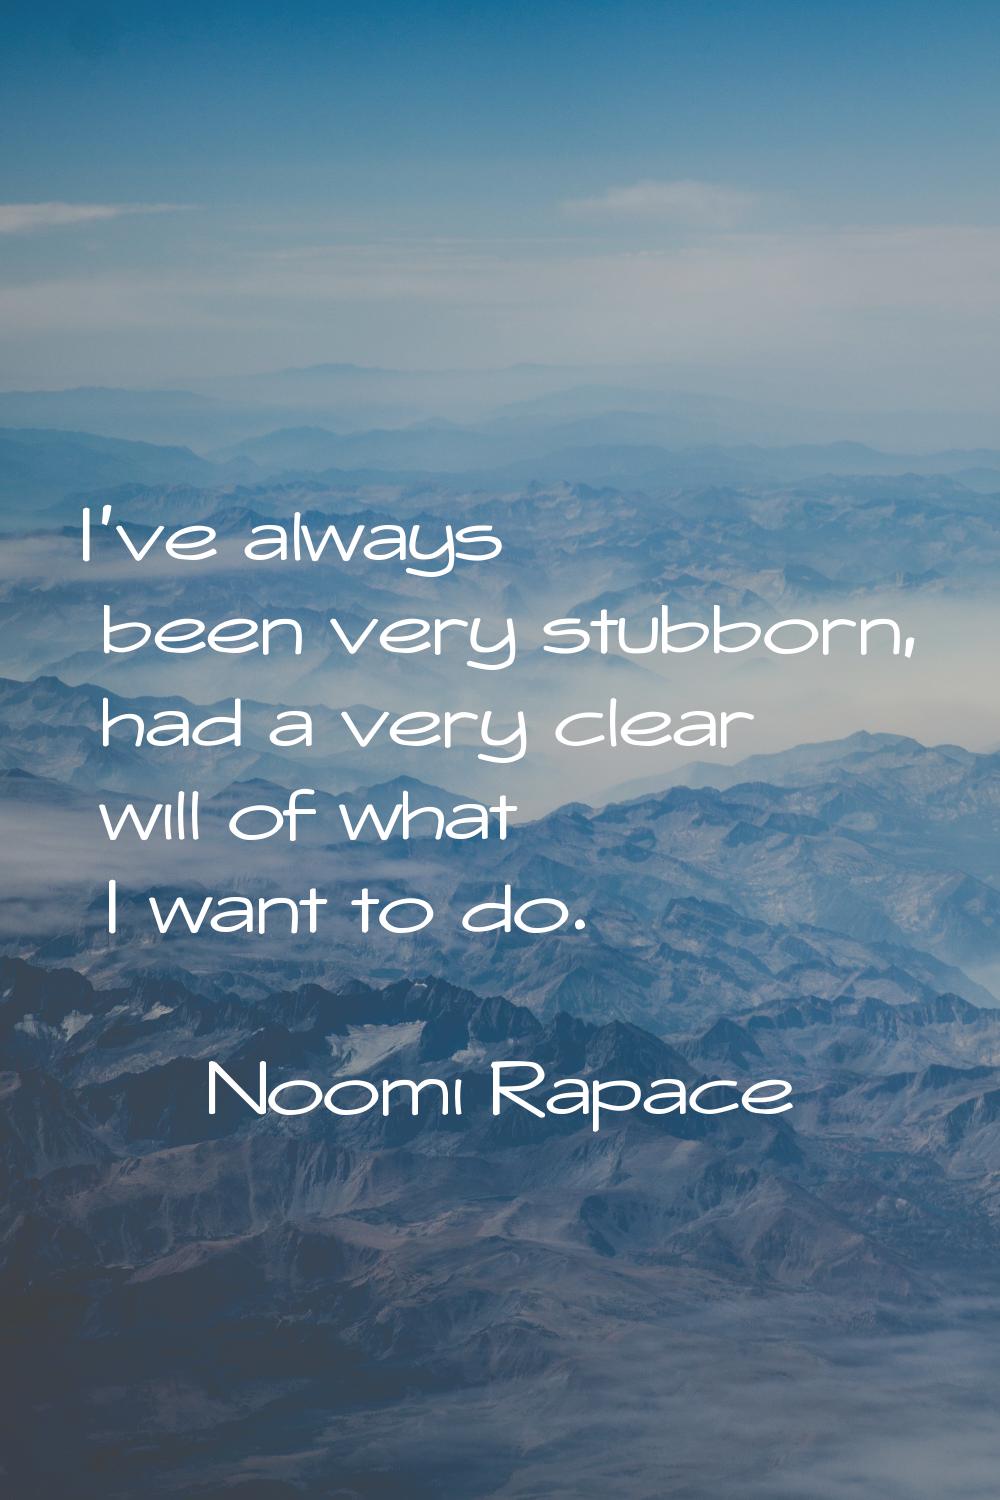 I've always been very stubborn, had a very clear will of what I want to do.